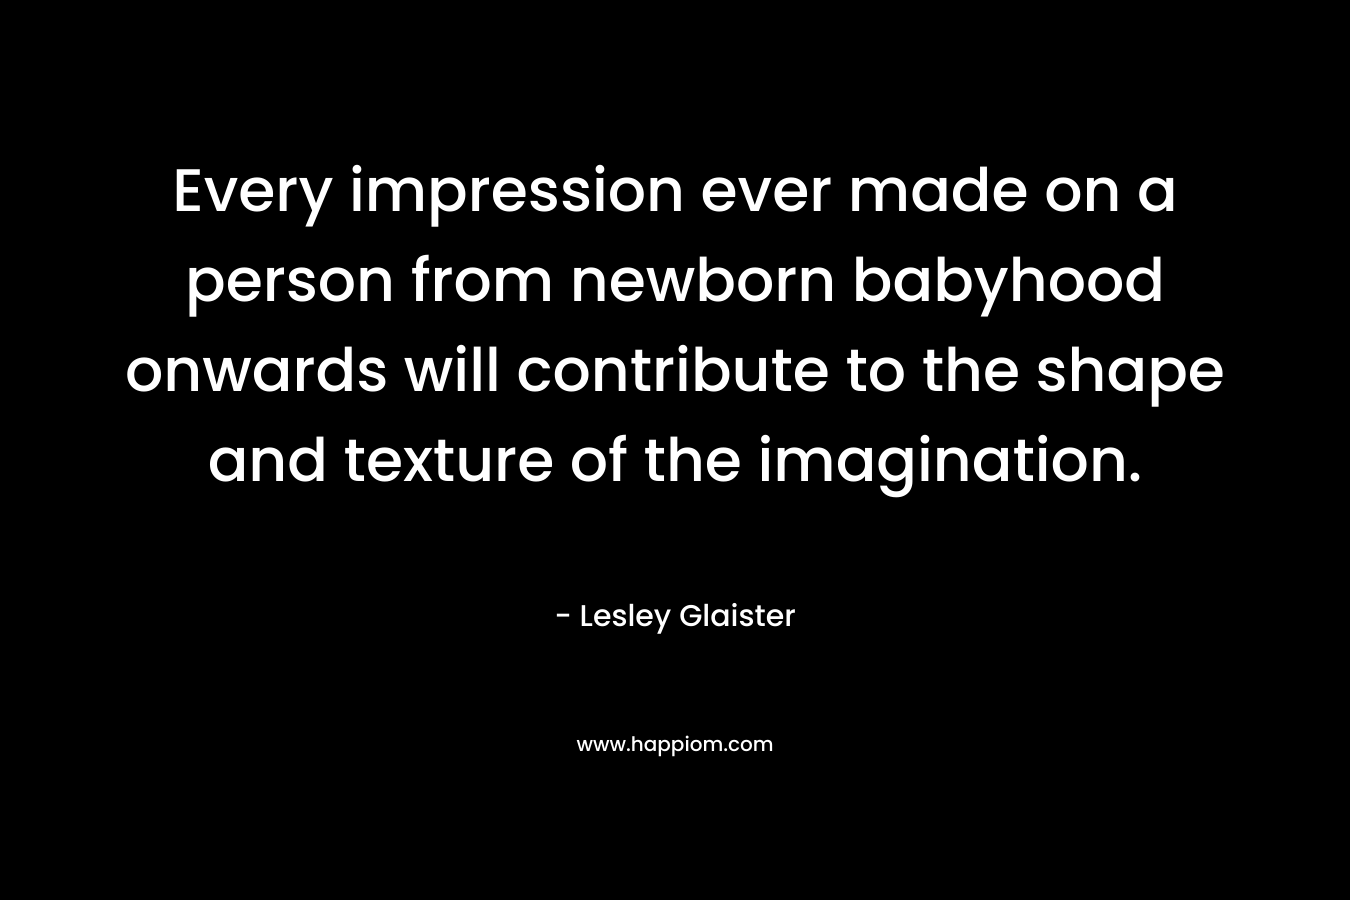 Every impression ever made on a person from newborn babyhood onwards will contribute to the shape and texture of the imagination.